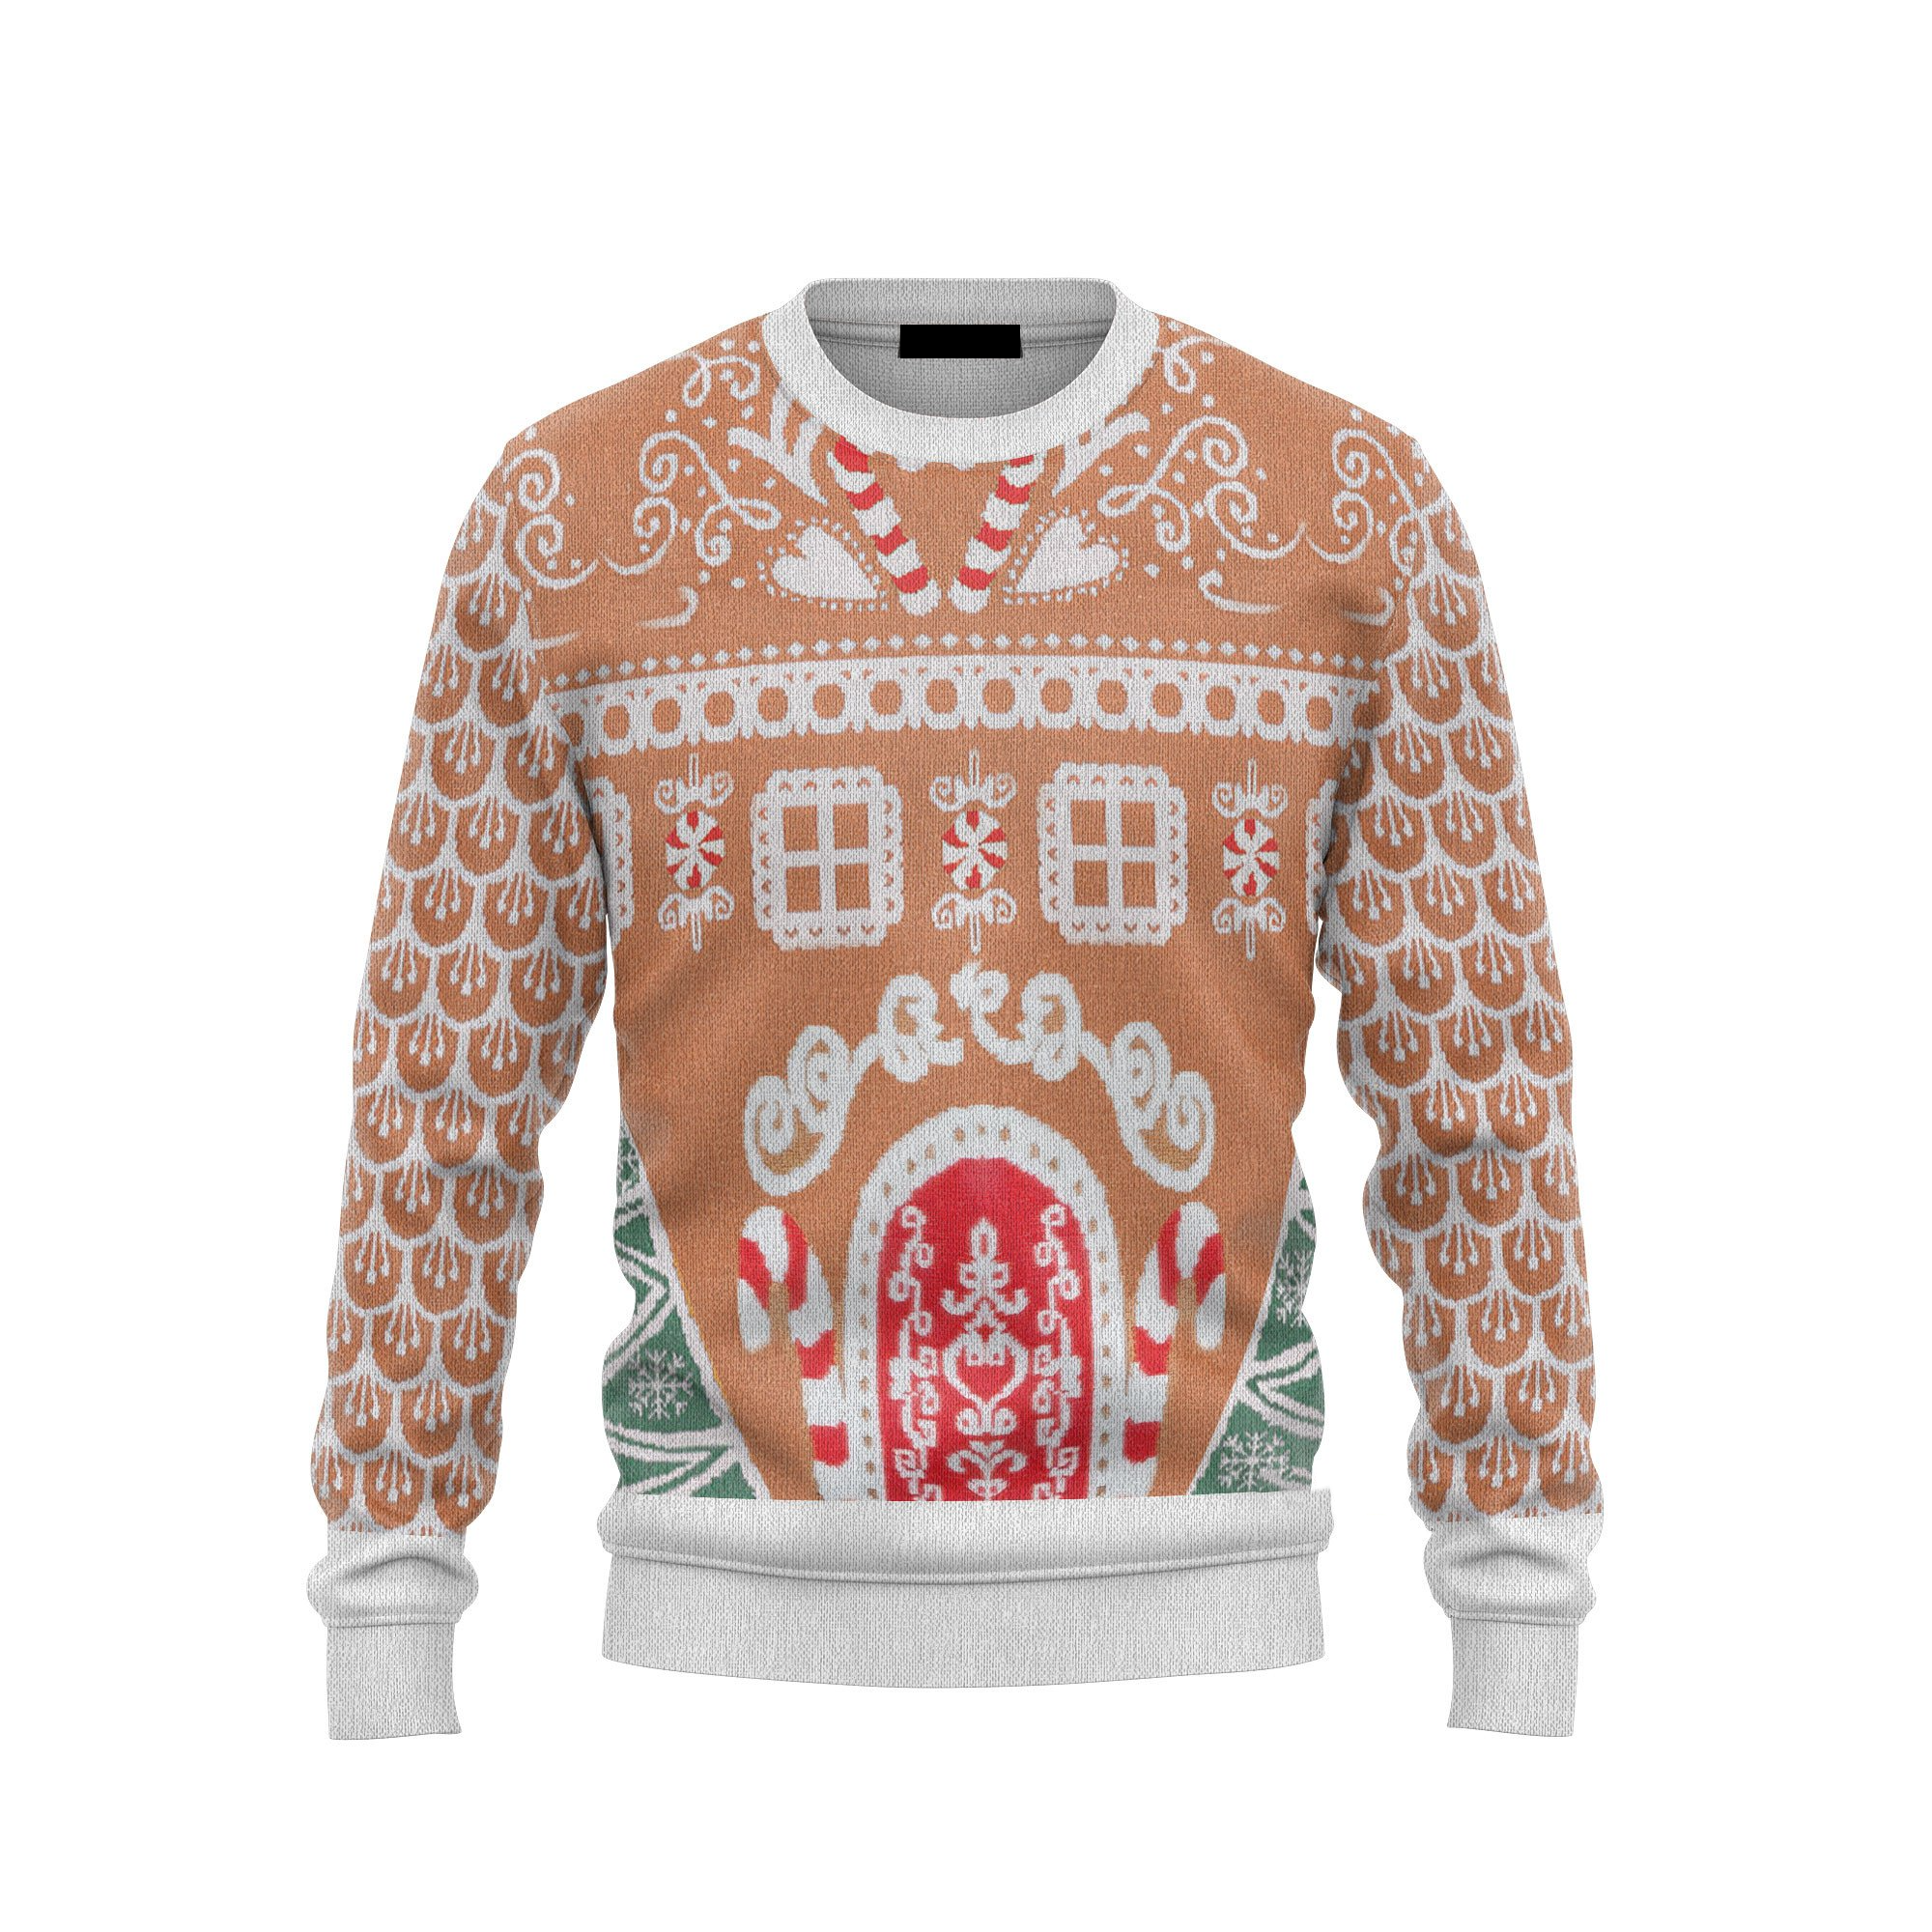 Gingerbread House Ugly Christmas Sweater for Men Women